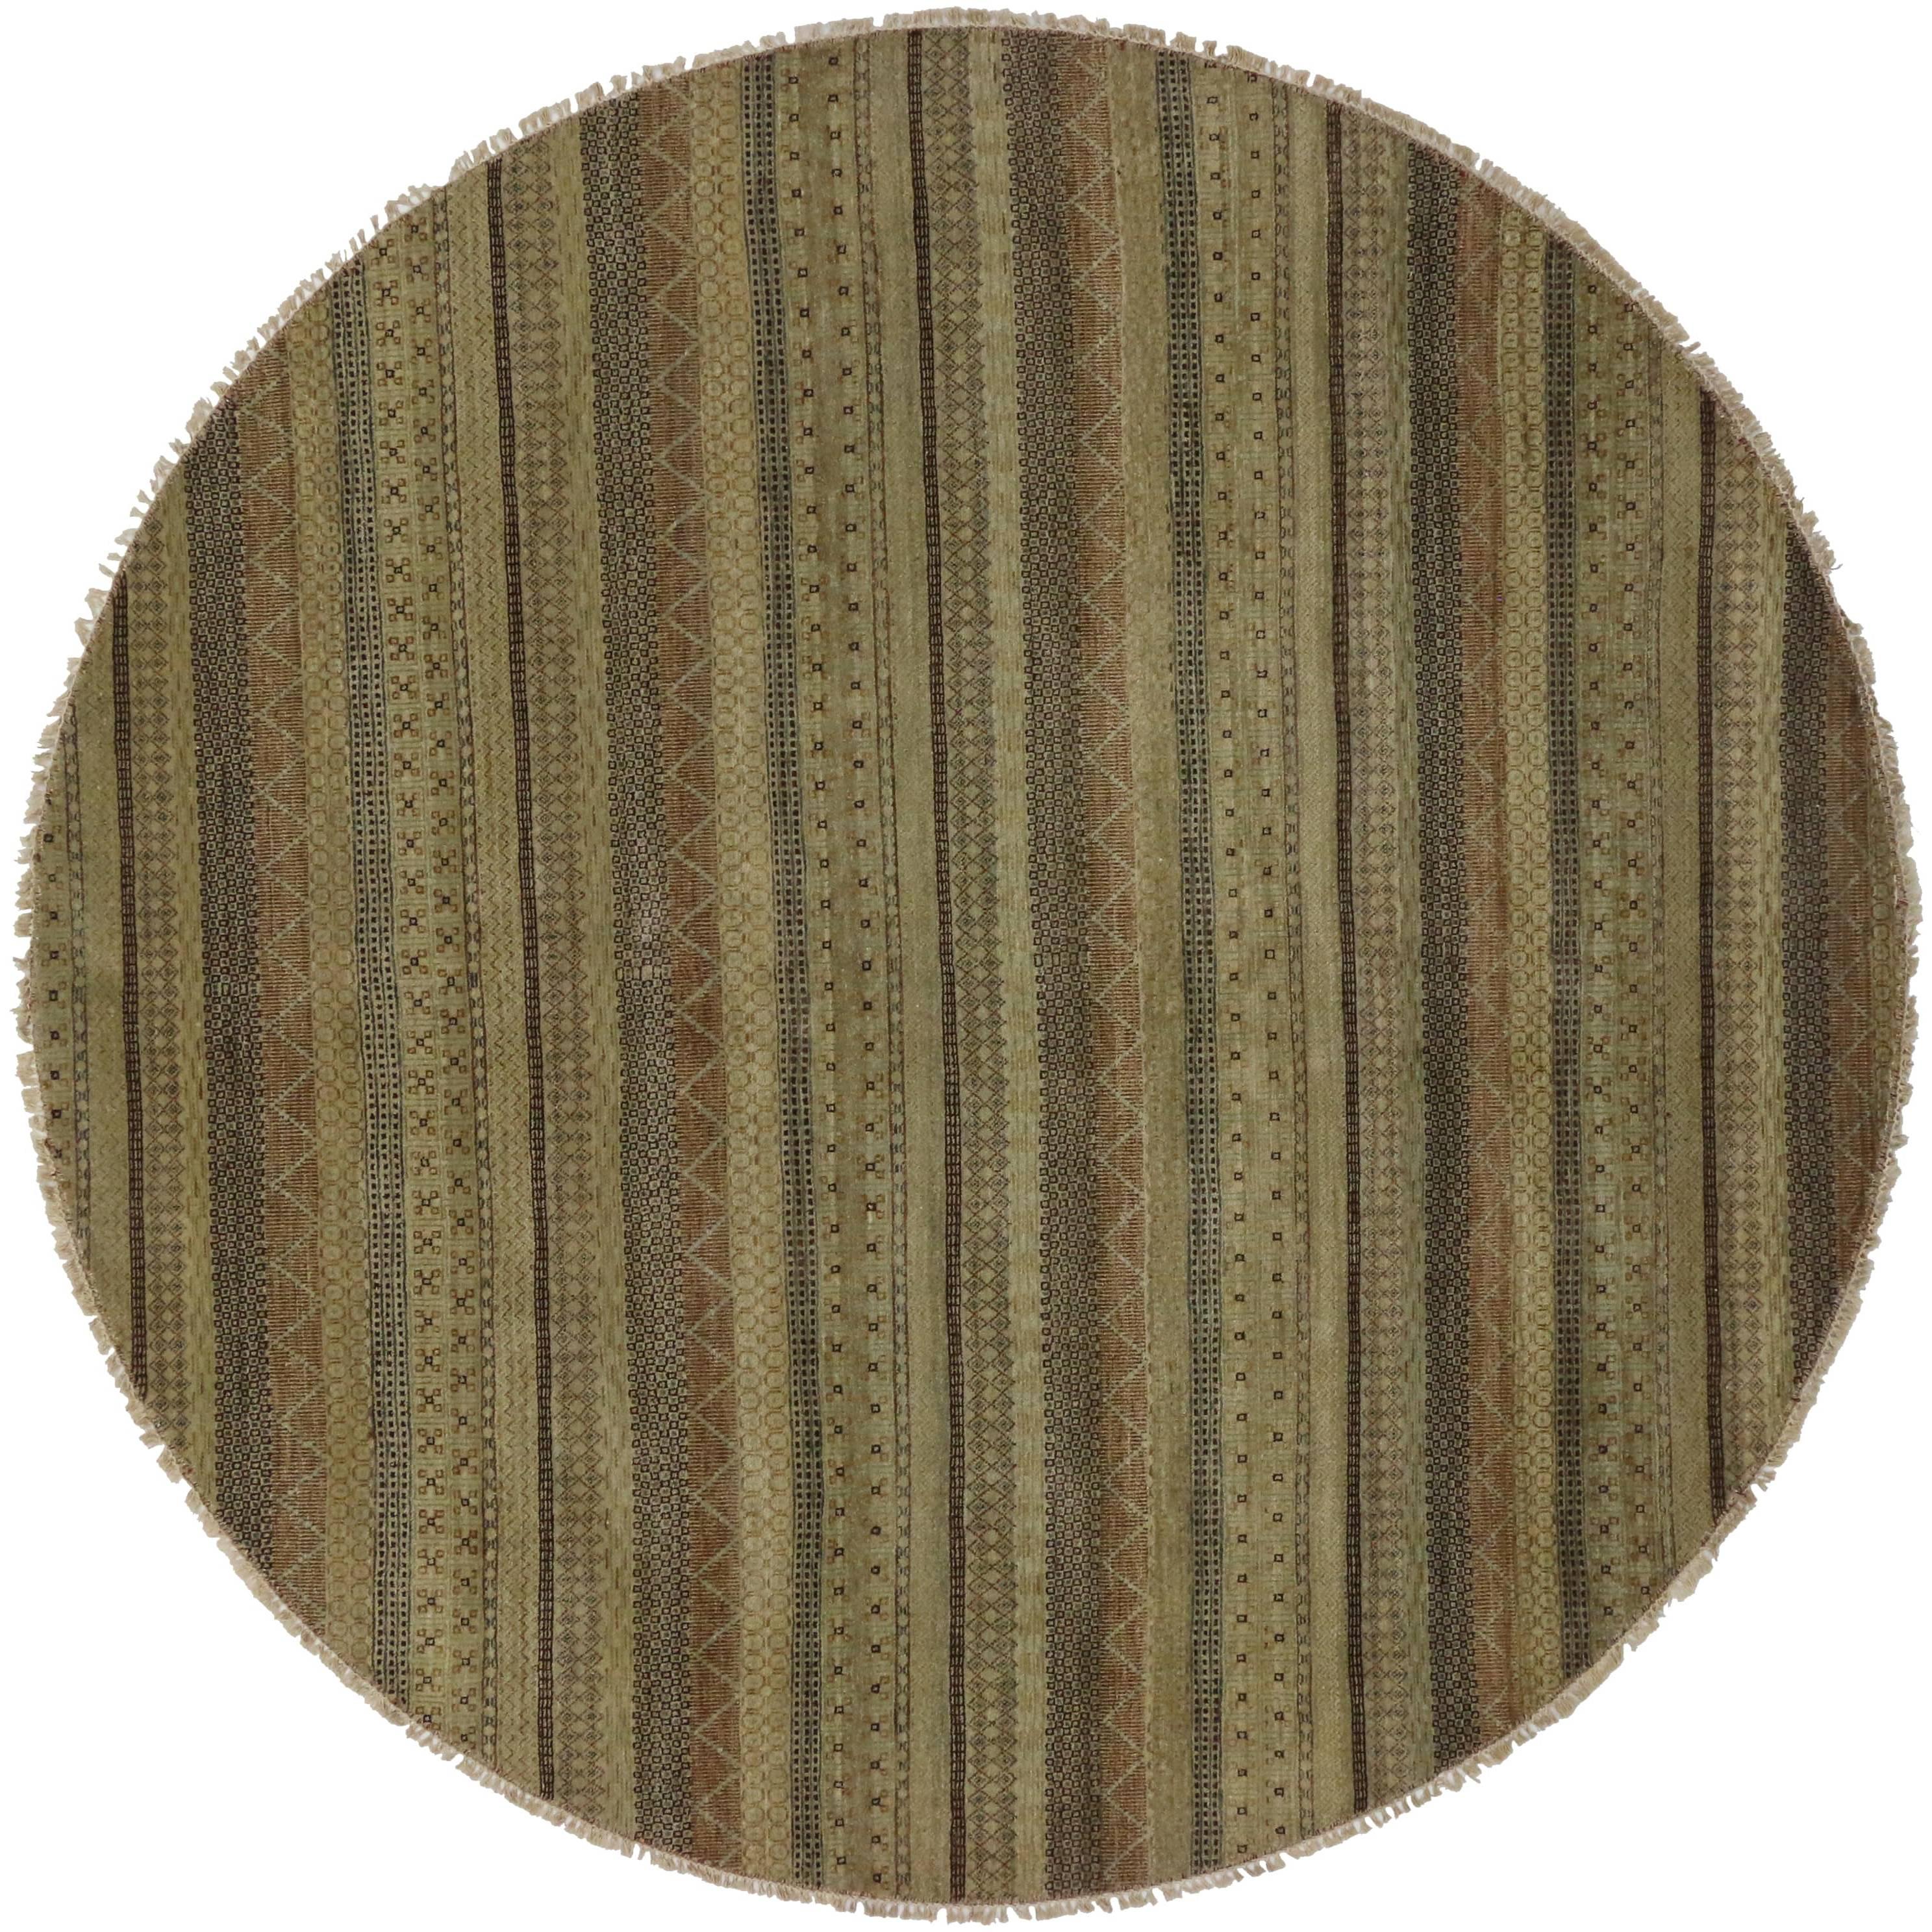 New Transitional Round Rug With Stripes and Modern Style For Sale